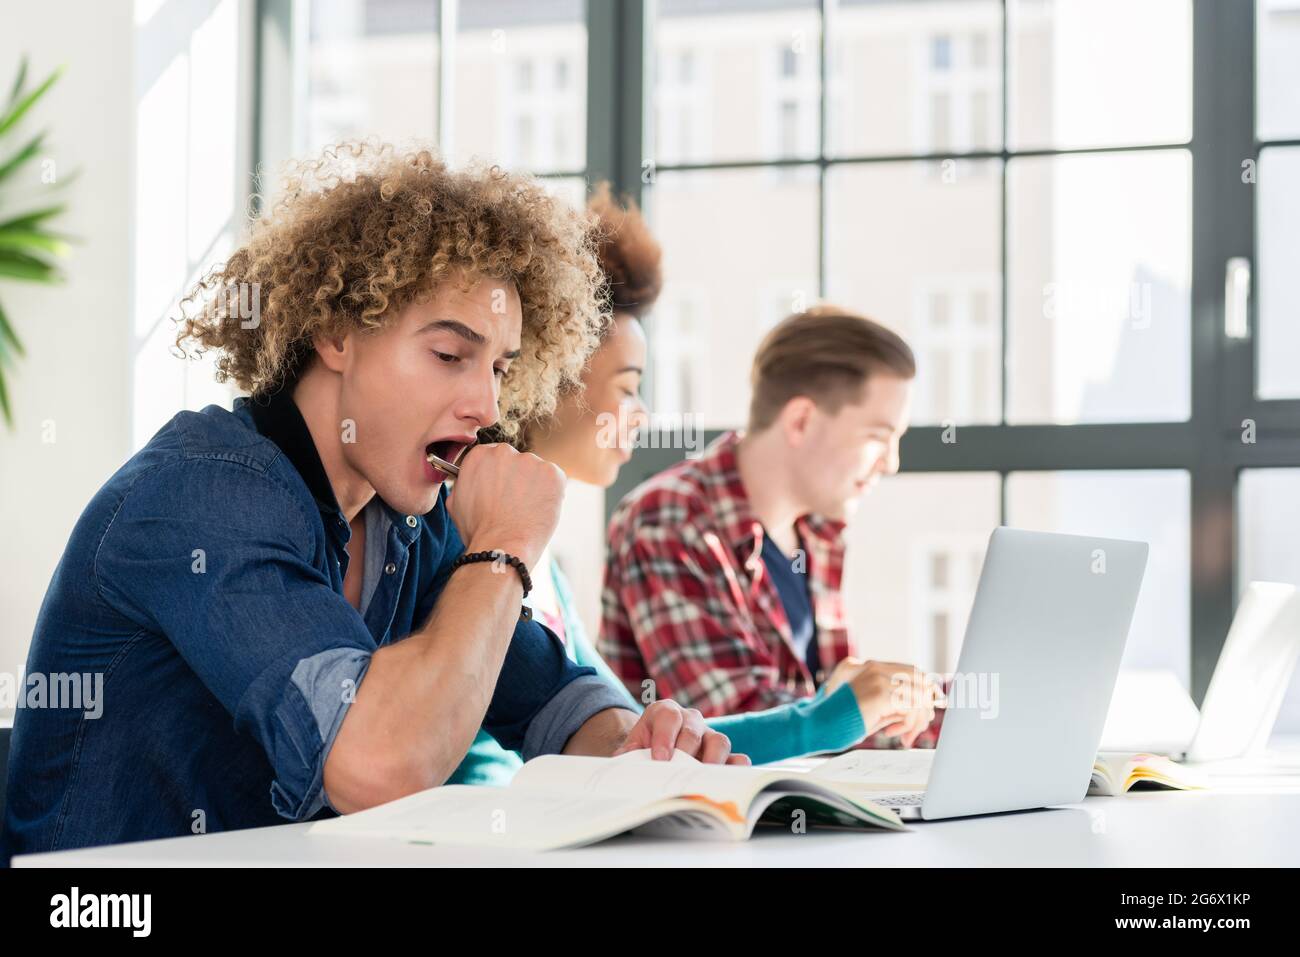 Side view portrait of a funny student yawning in front of a book, while sitting down at desk in the classroom at a modern college or university Stock Photo